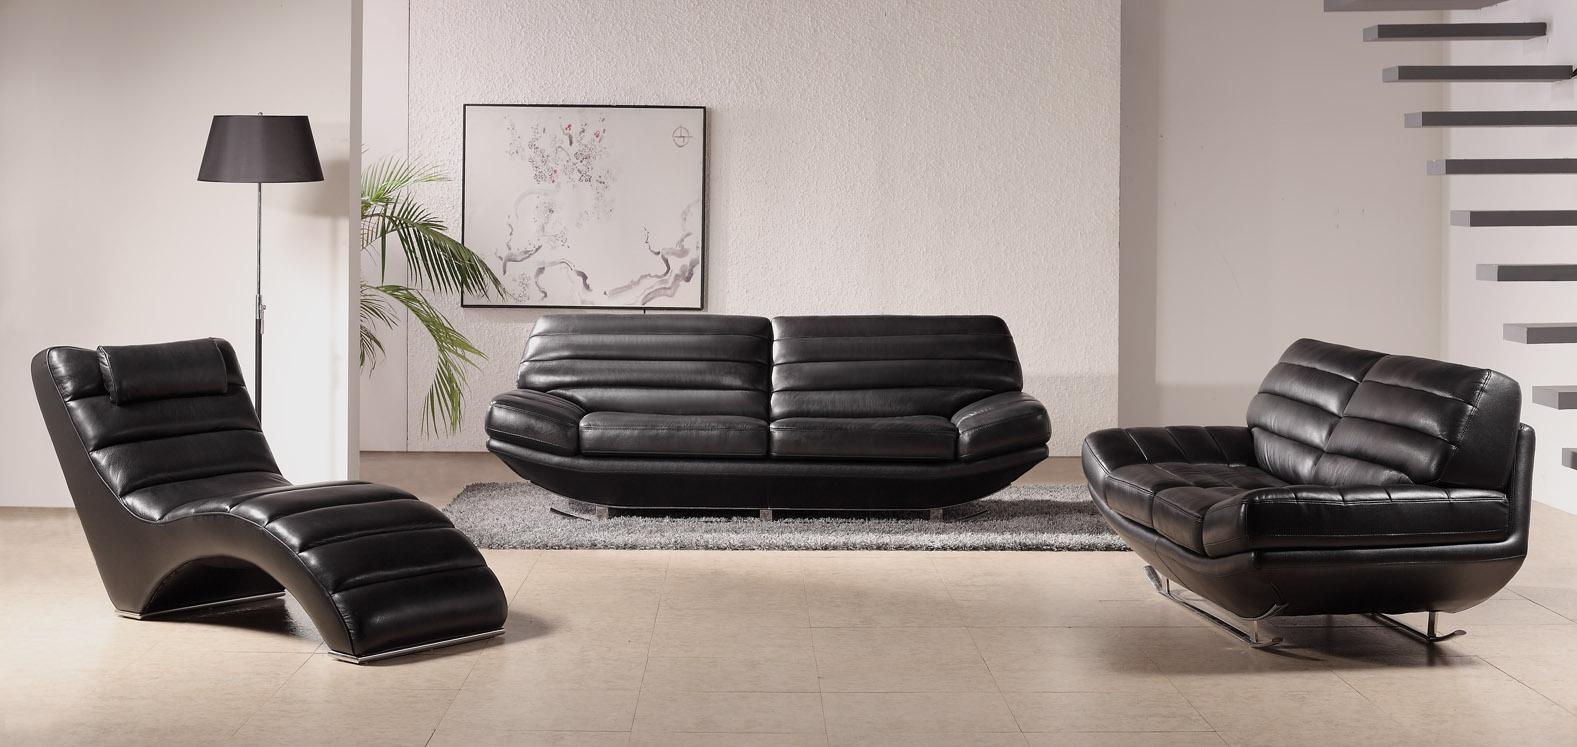 Modern Living With Wonderful Modern Living Room Design With Black Colored Contemporary Sofas Made From Leather And Cream Colored Floor Which Is Made From Marble Blocks Bedroom Remarkable Beautiful Contemporary Sofas With Various Elegant Styles